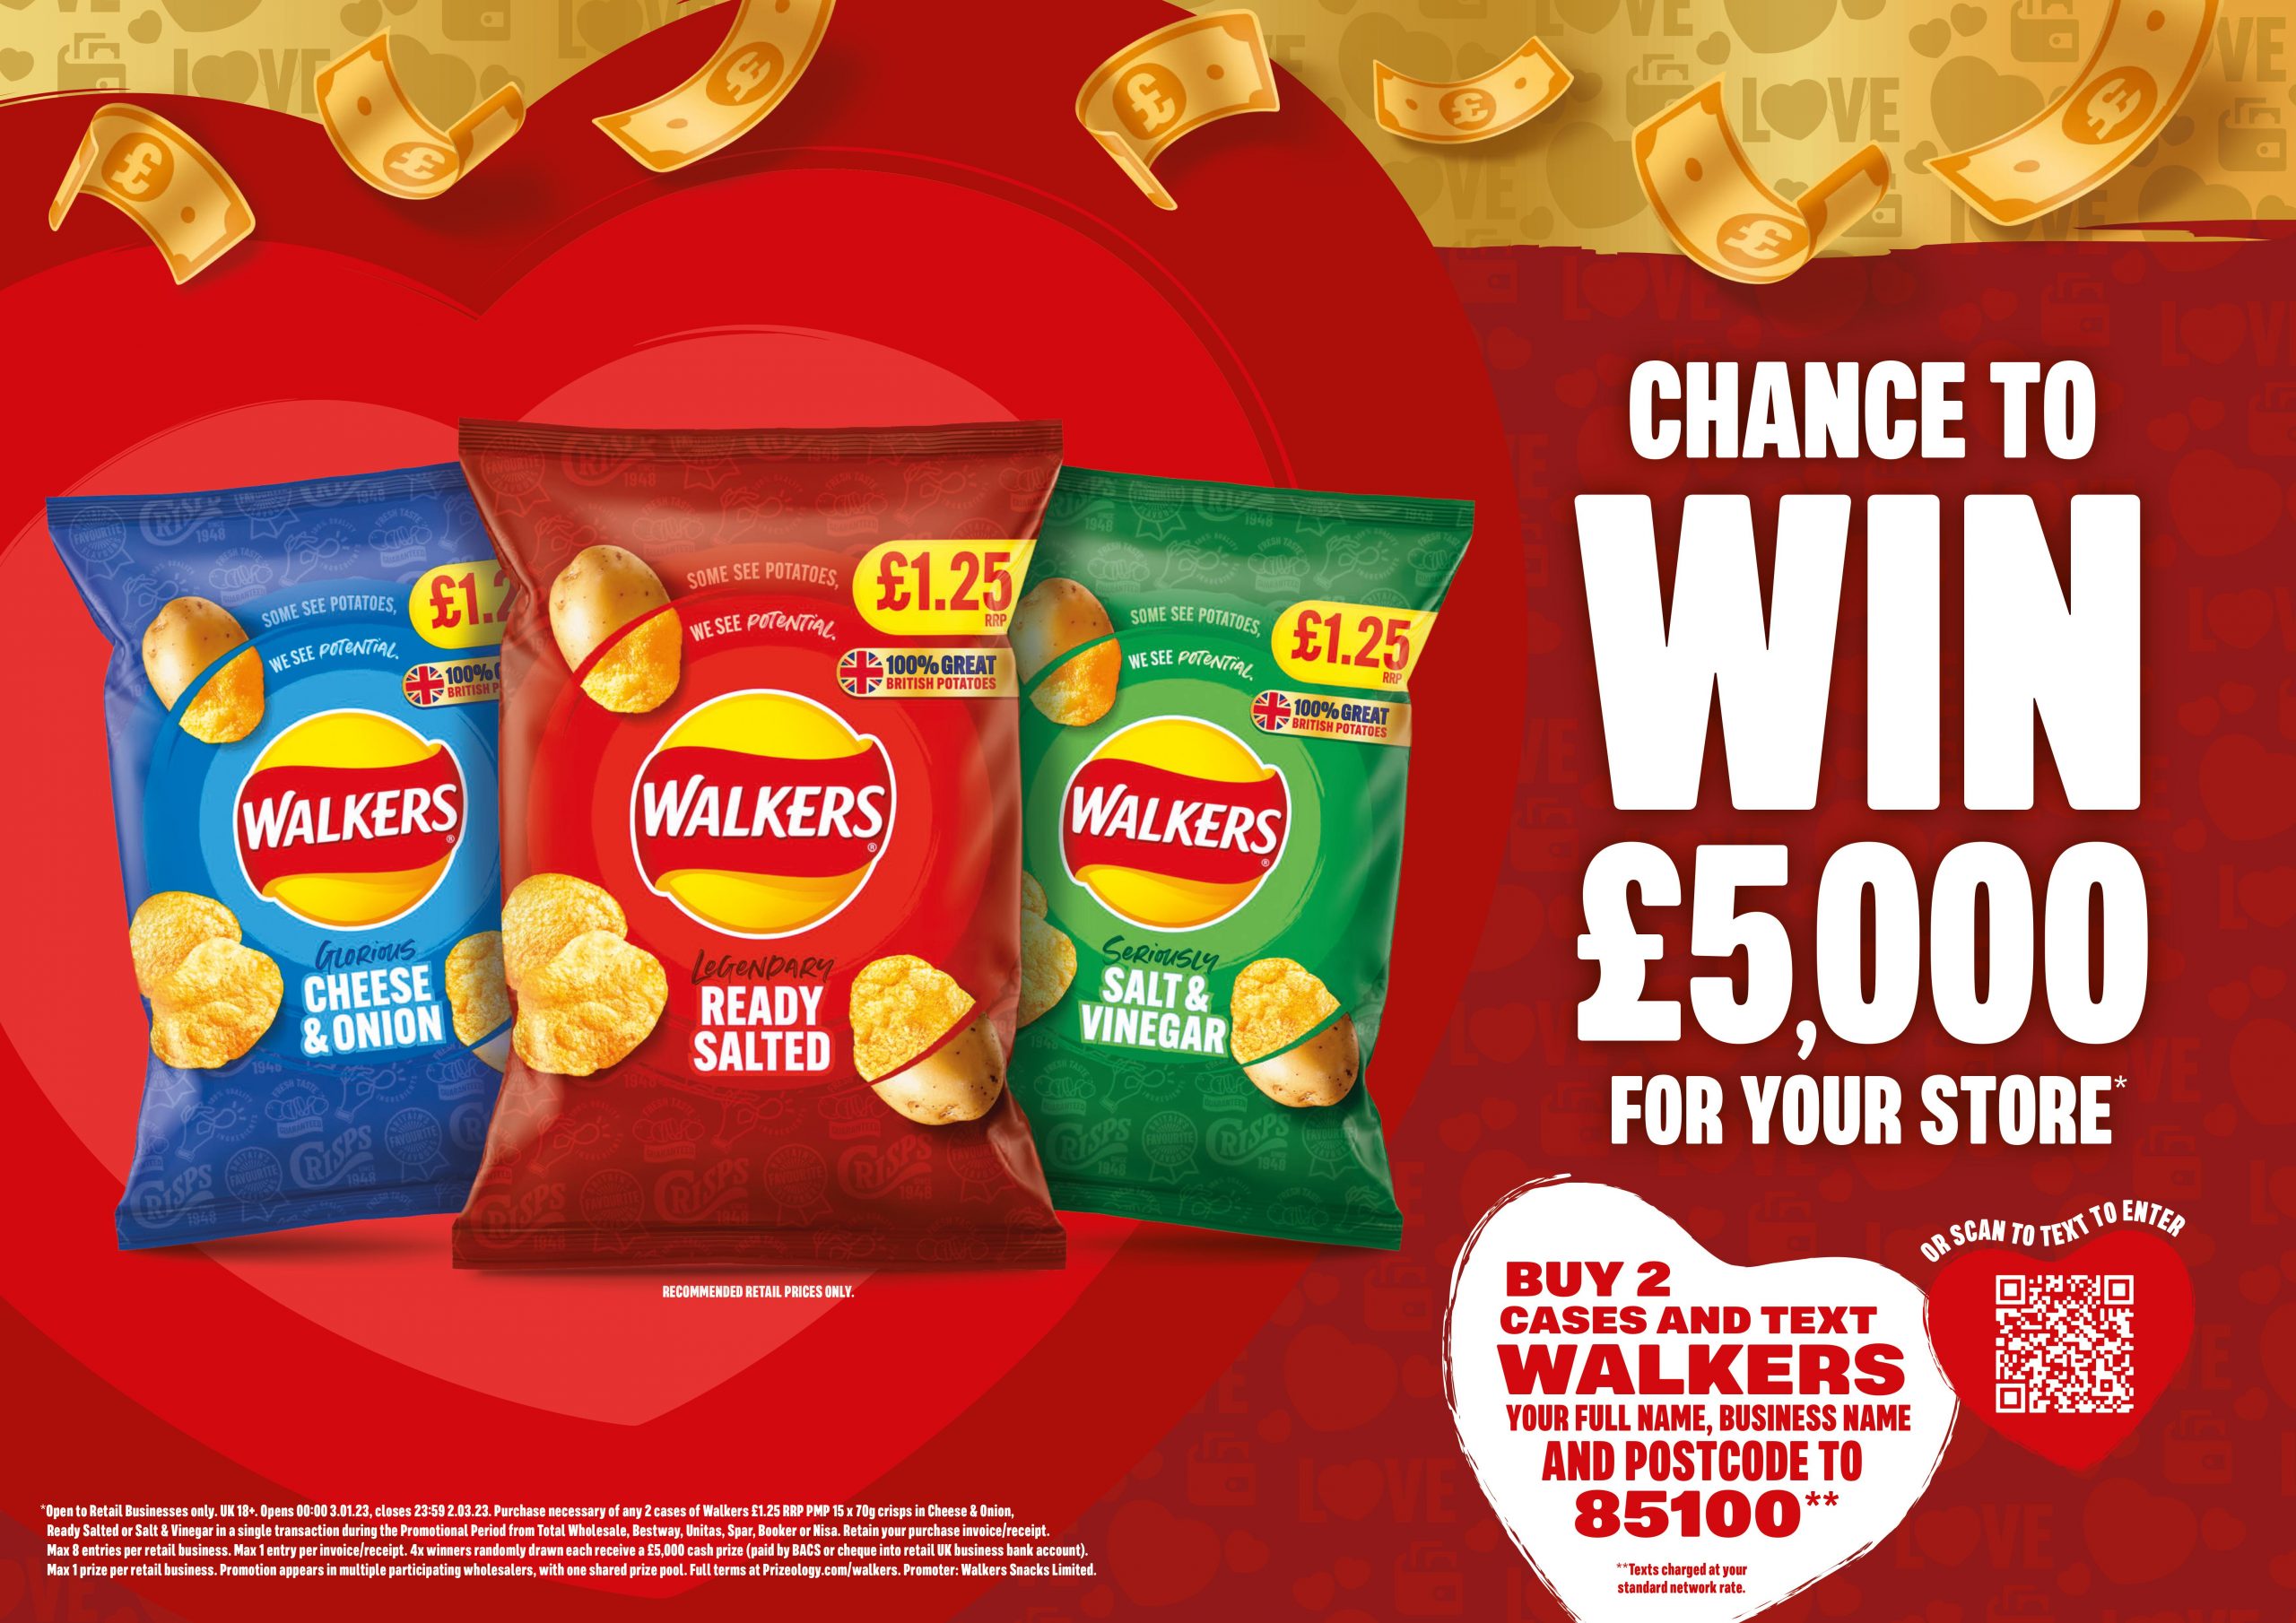 Retailers can win £5k for their store with Walkers